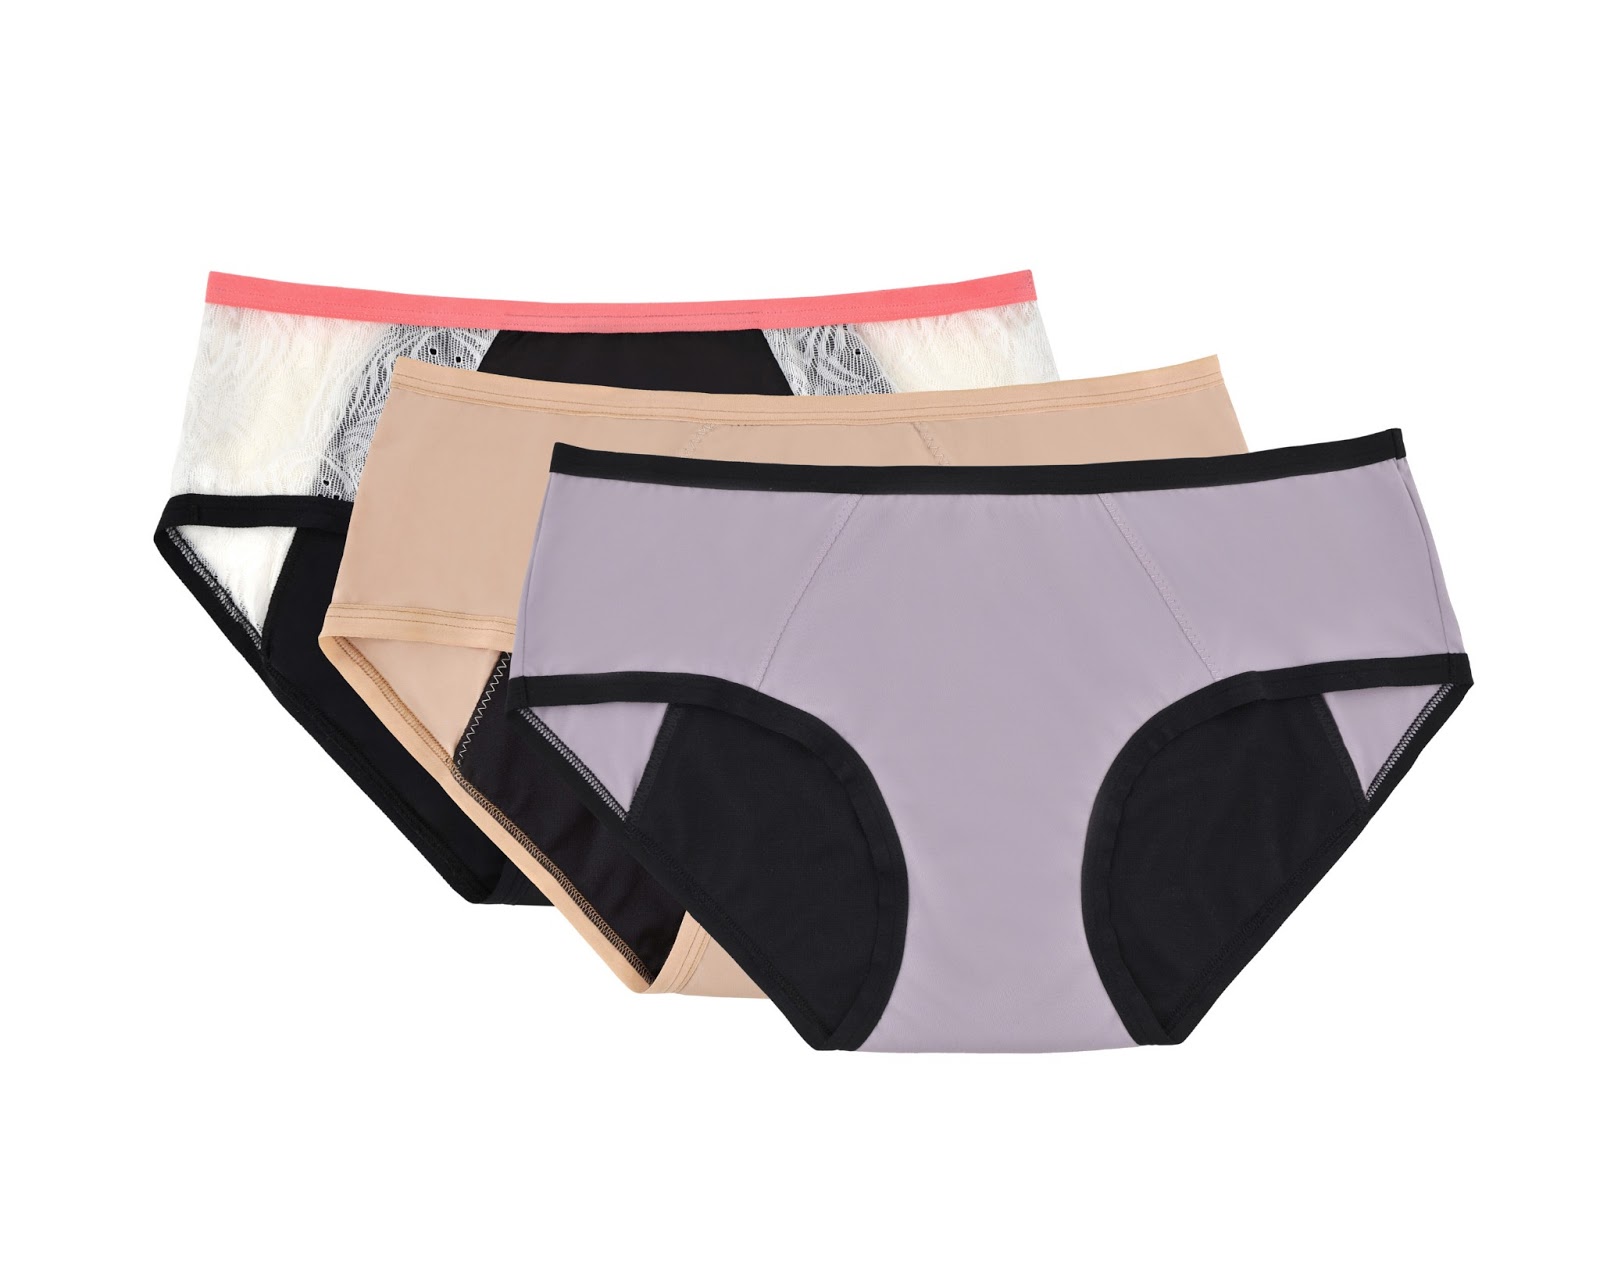 Review: Dear Kate engineered underwear for pregnancy and beyond!